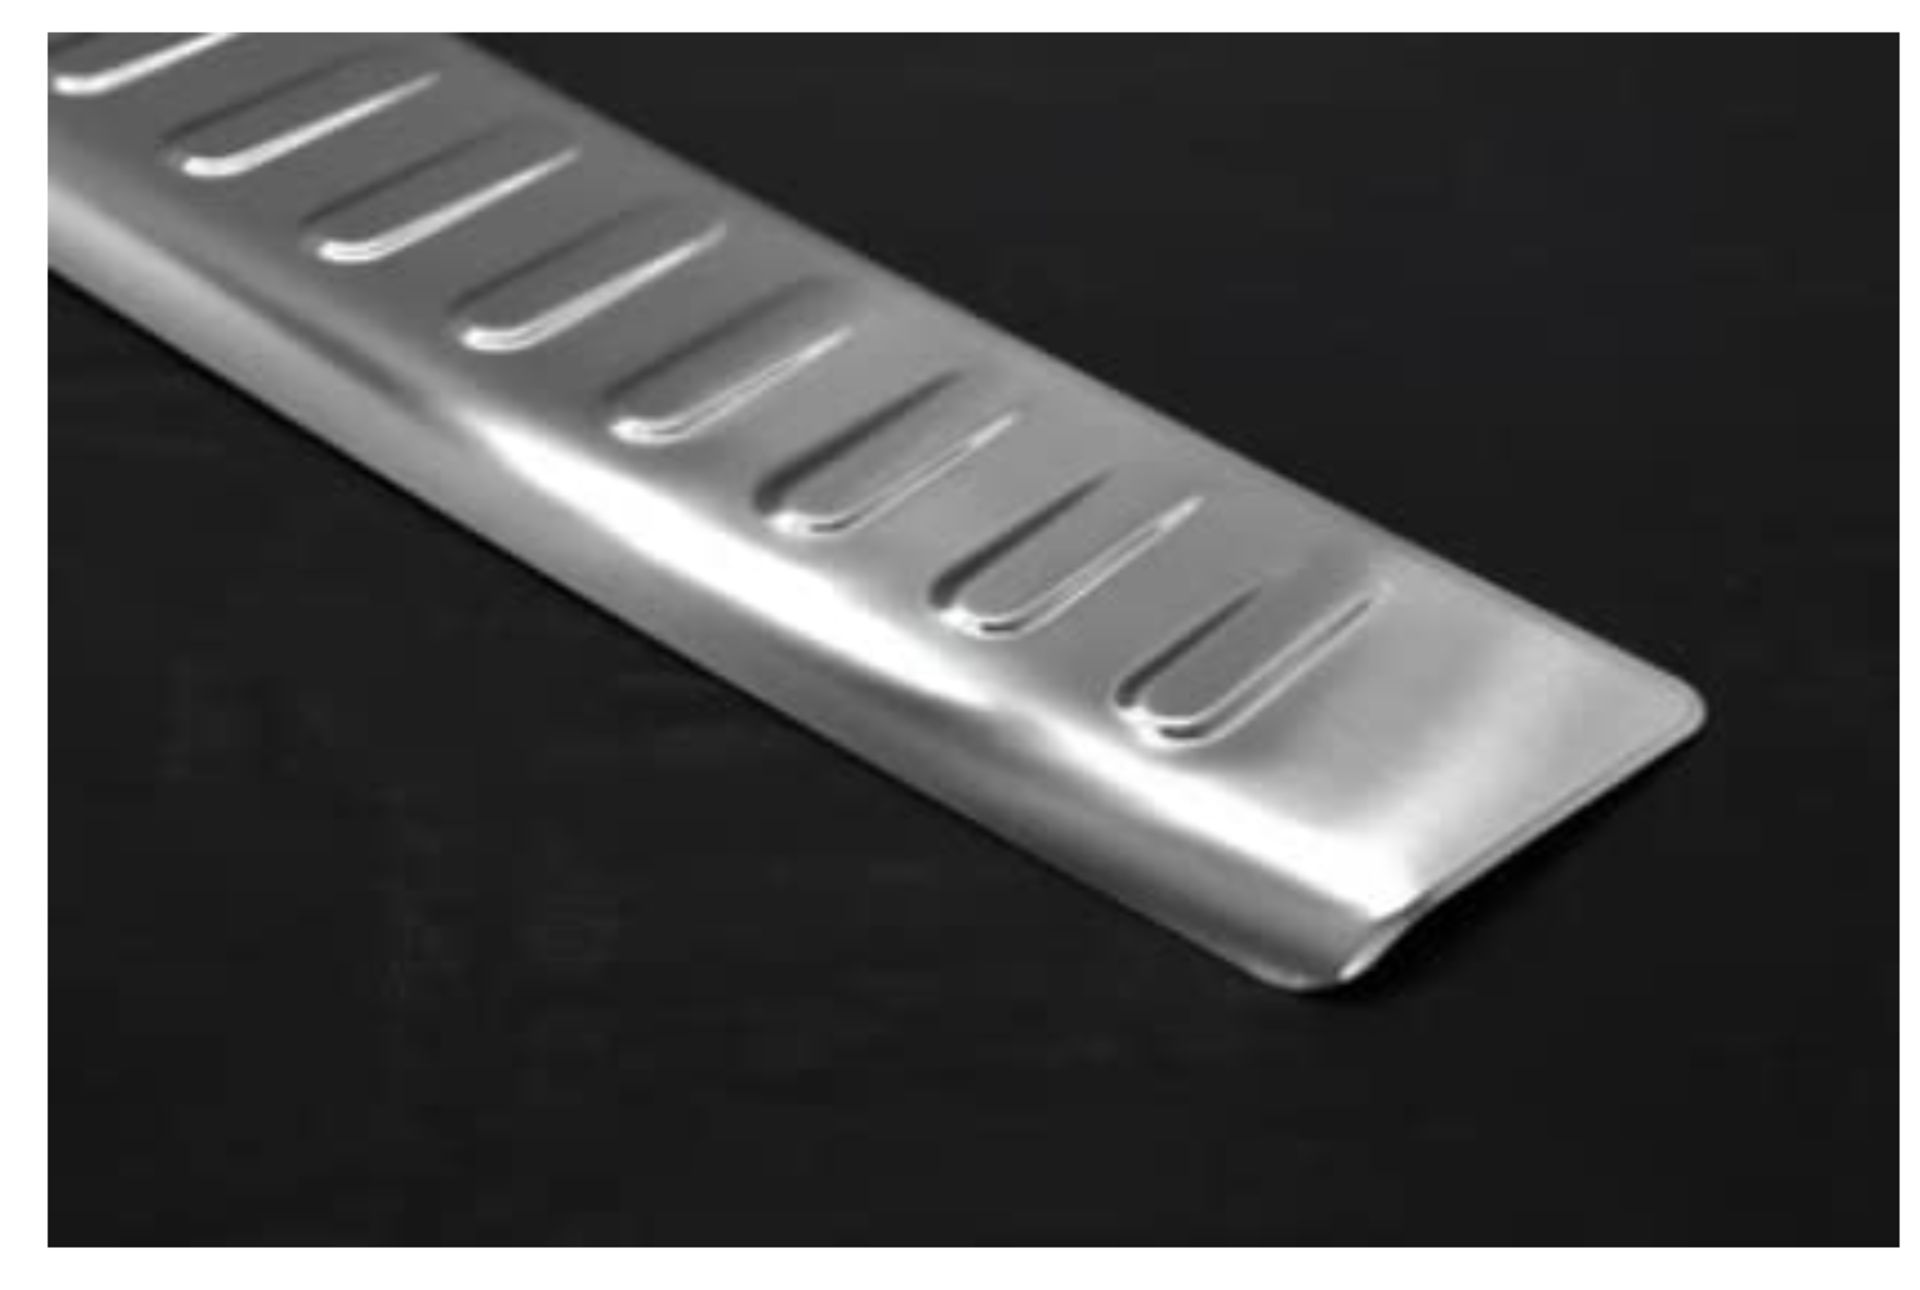 100 X LOTS VW TOURAN MK2 1T3 2010-2014 STAINLESS STEEL REAR BUMPER PROTECTOR, SCRATCH GUARD - Image 2 of 5